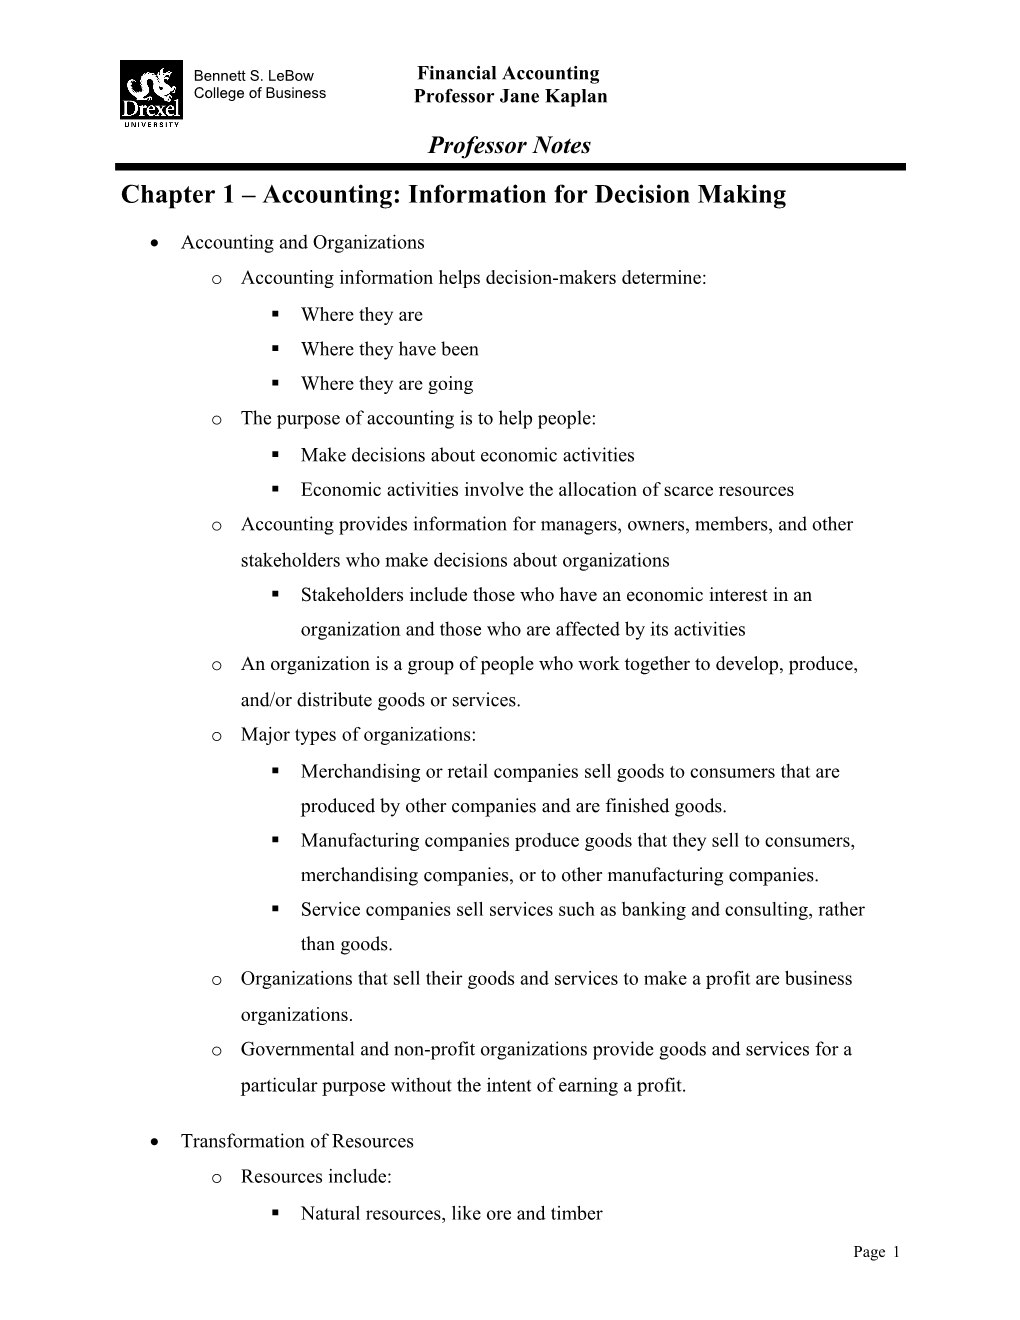 Chapter 1 Accounting: Information for Decision Making